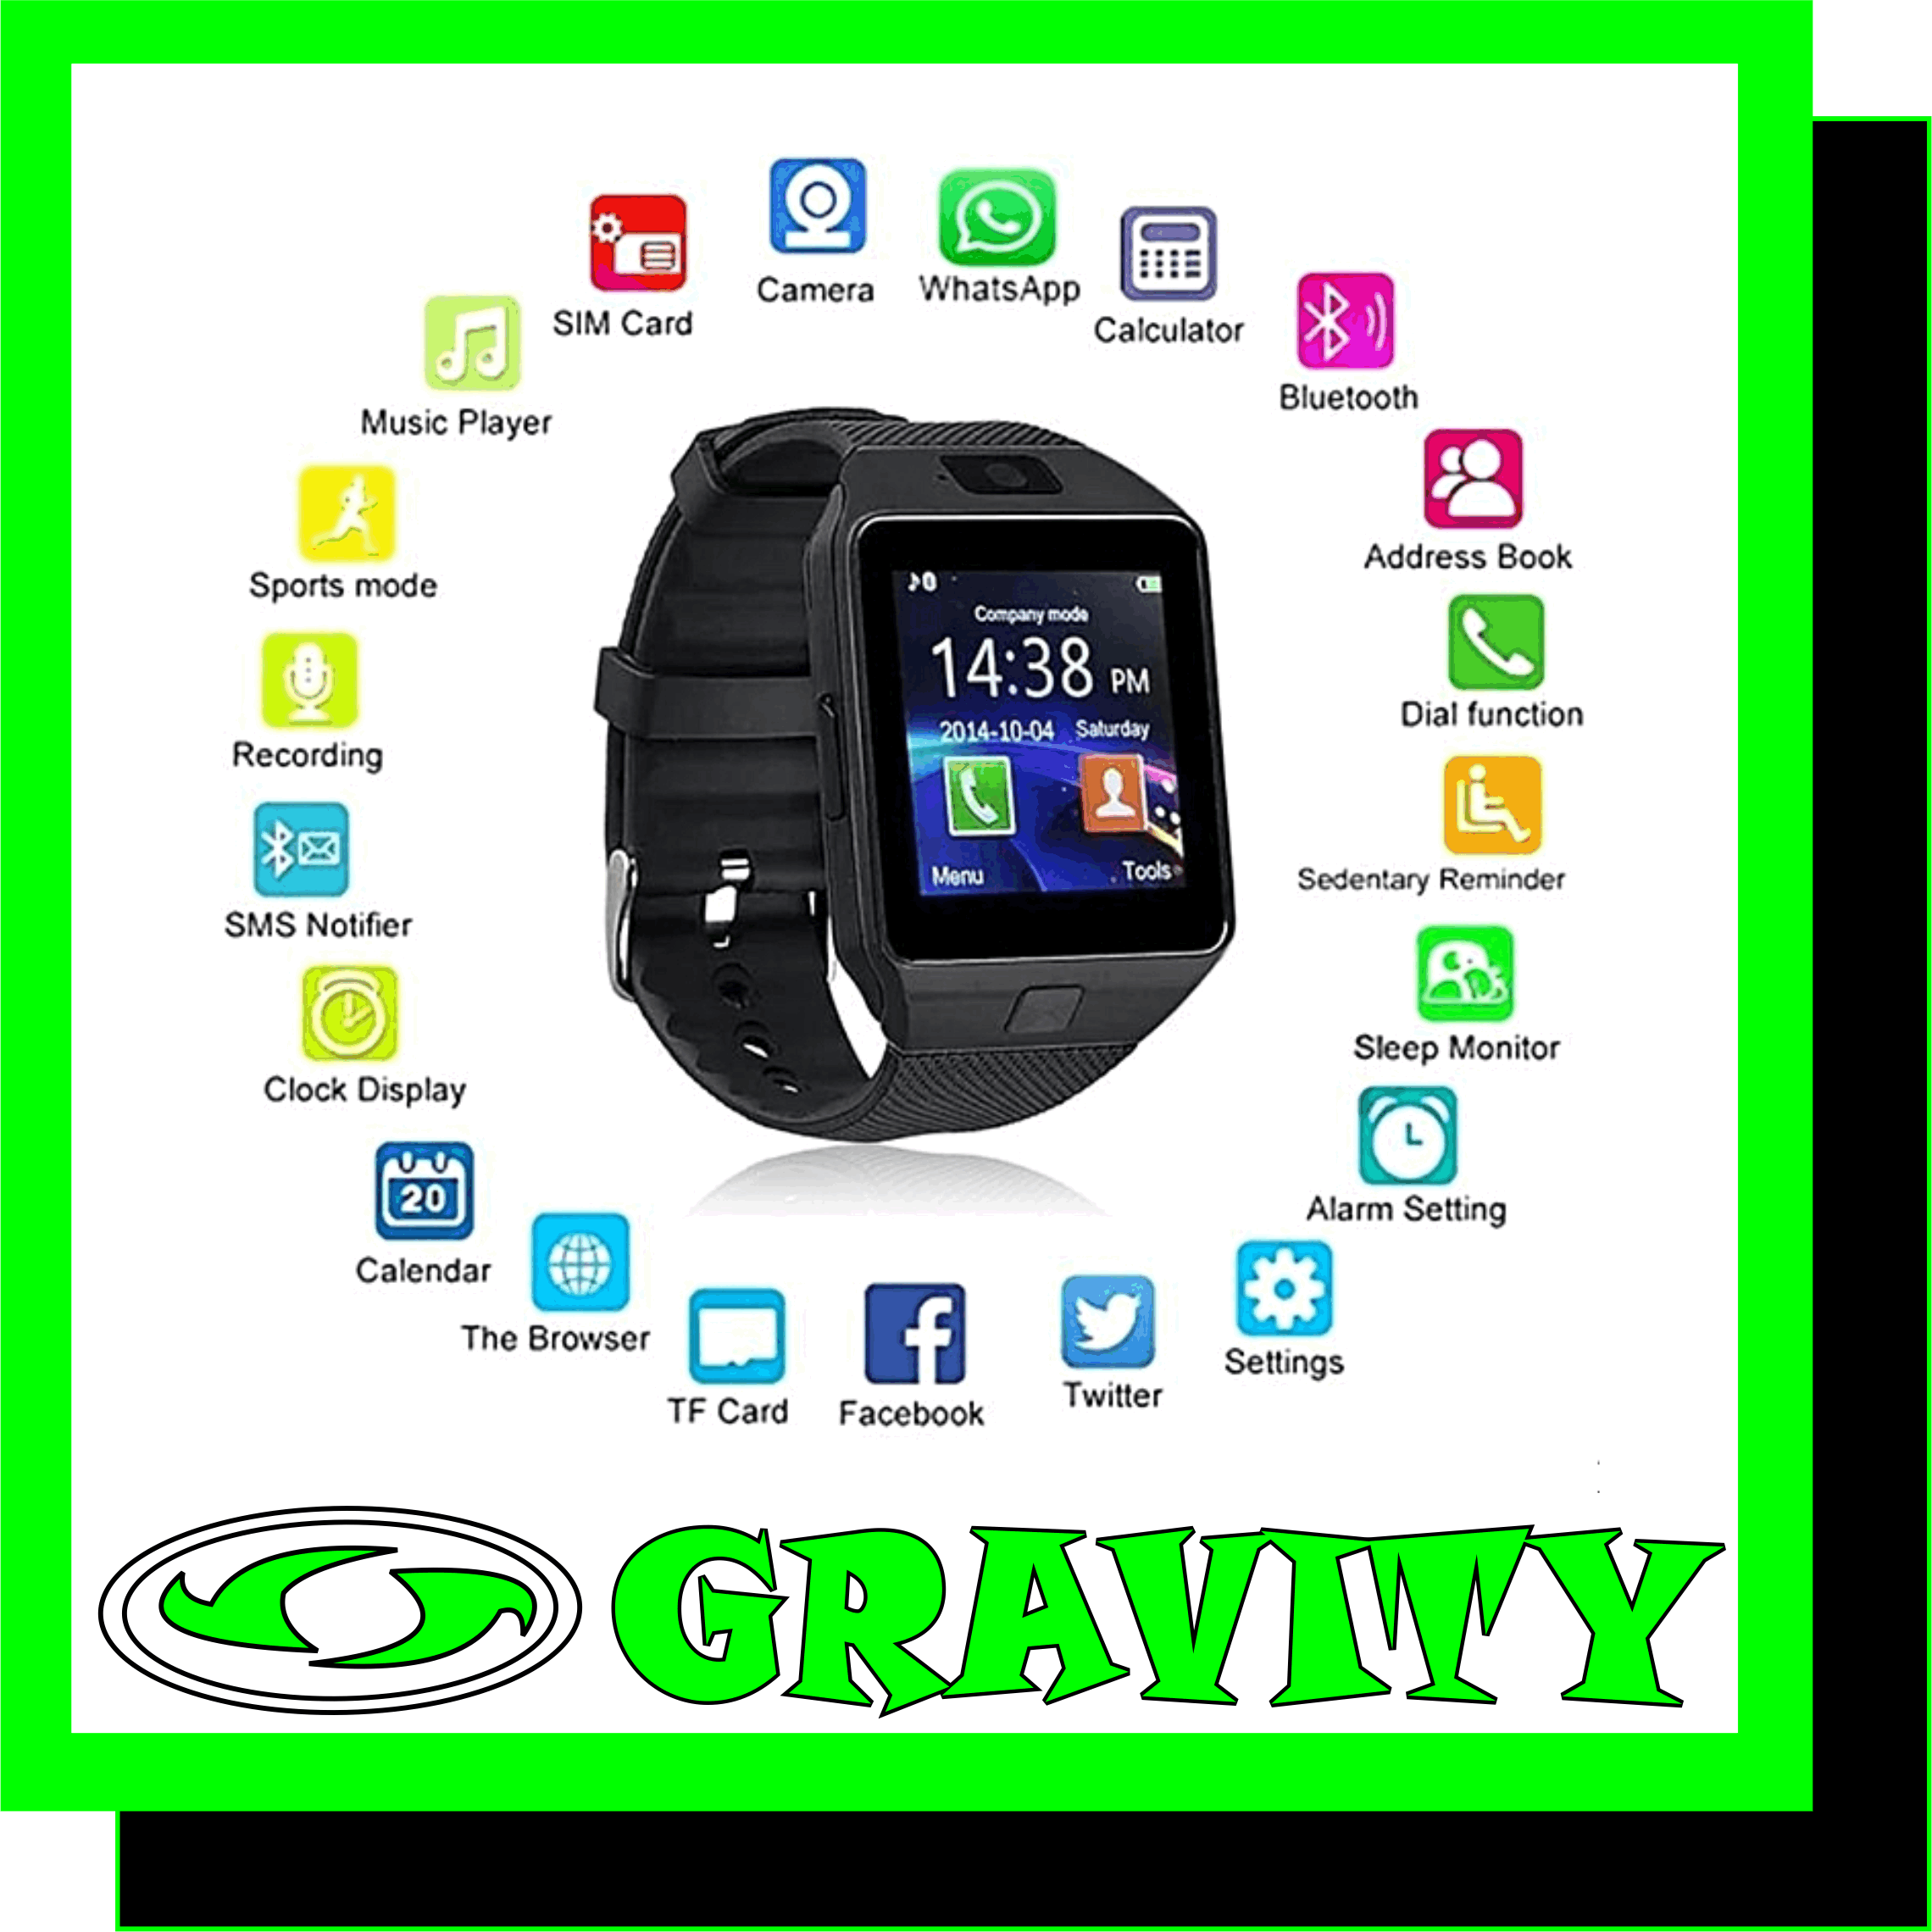 Features: - GSM 850/900/1800/1900 MHz , Single Micro SIM Card - Bluetooth Dialer, Call Reminder, Bluetooth Call - Bluetooth SMS/IM Message Notified - 1.56" TFT LCD Touch Screen 240*240 pixels - 1.3M Camera (Video Recording not Support) - Anti-loss Technology to bind phone - Pedometer, Sleep Monitor, Sedentary Reminder - Audio Player - Calendar (Synchronizable) Specification: -CPU: MTK6260A -Network & Connectivity: -SIM Card: Single SIM Card (Micro SIM Card) Can be as a phone -Frequency: GSM 850/900/1800/1900 MHz -Bluetooth: (Built - in) - BT3.0, BT4.0 -Storage: External memory: Support TF card up to 32GB -Display: 1.56 inch TFT LCD, 240 x 240 pixels -Camera: 1.3 M Media: -Music: Support -Picture Format: JPEG, GIF, BMP, PNG -Music Format: MP3, WAV -Languages: Support kinds of langauage, Pls check the language photo. -Functions: Bluetooth Dialer, Contacts, Call Reminder, Alarm, Anti-loss, Pedometer, Sleep Monitor,Sedentary Reminder, Calendar,Calculator,Sound Recorder,Camera,Audio Player ,Browser Facebook,Twitter, Whatsapp -Battery: 380 mAh -Talk Time: 3~ 6 Hours -Standby Time: 2~7days -SMS: Support -USB Port: Mini USB 5pin interface -Color: Black,White,Coffee,Sliver -Size: 43.5*40*11.5 (mm) -Gravity Sensor: Support - Case Material: Metal /Band Material:Silicon